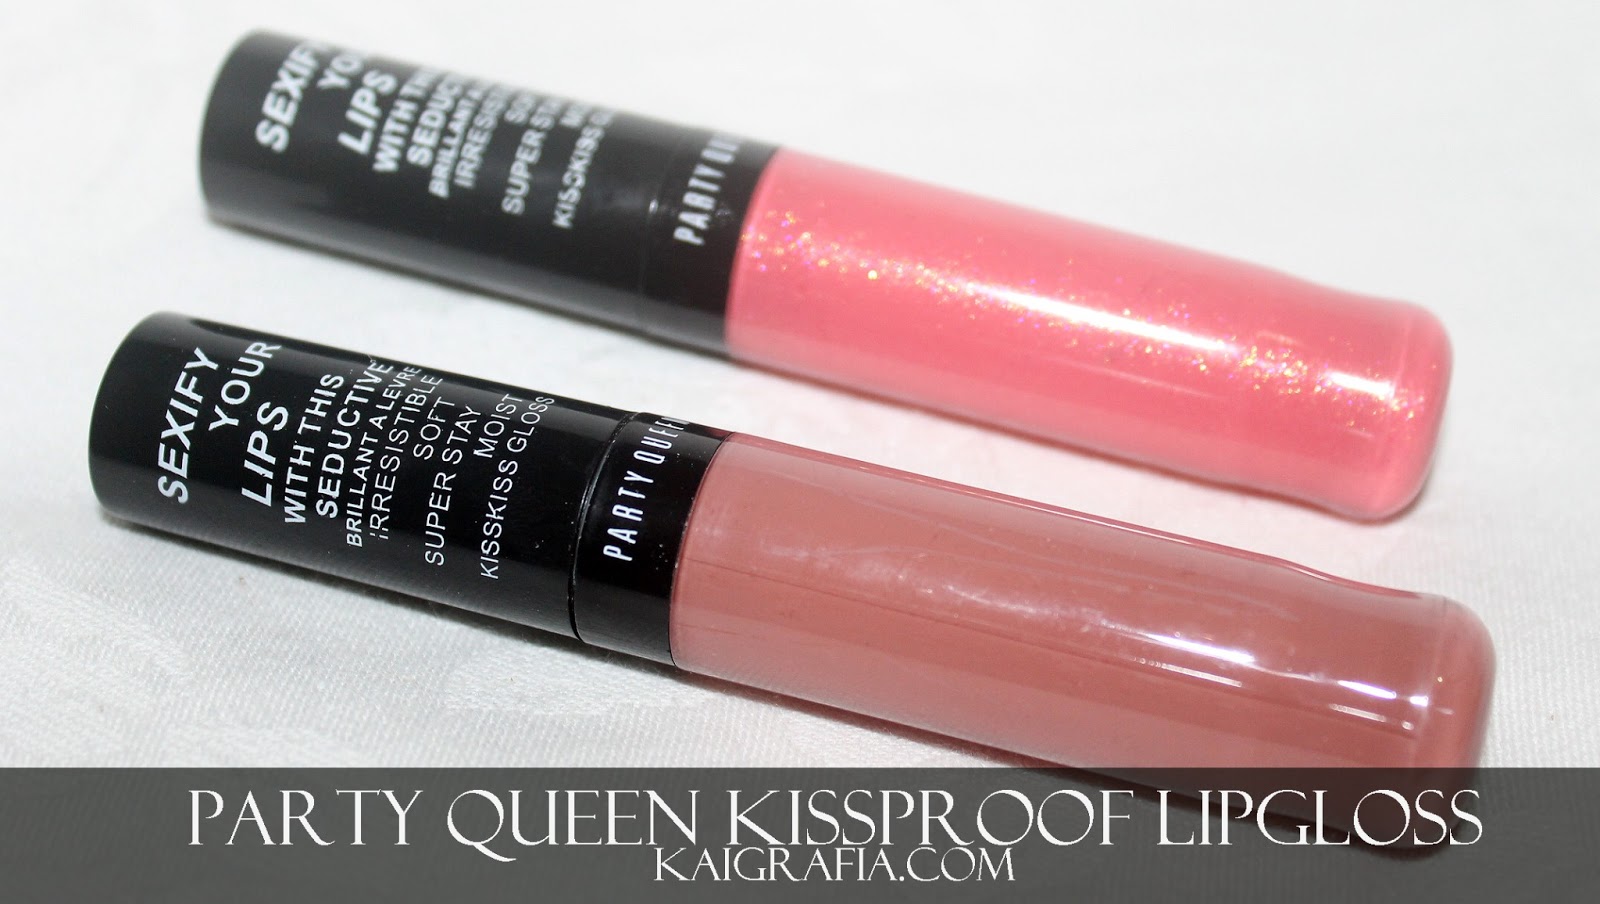 Party Queen Kissproof lipgloss affordable makeup review